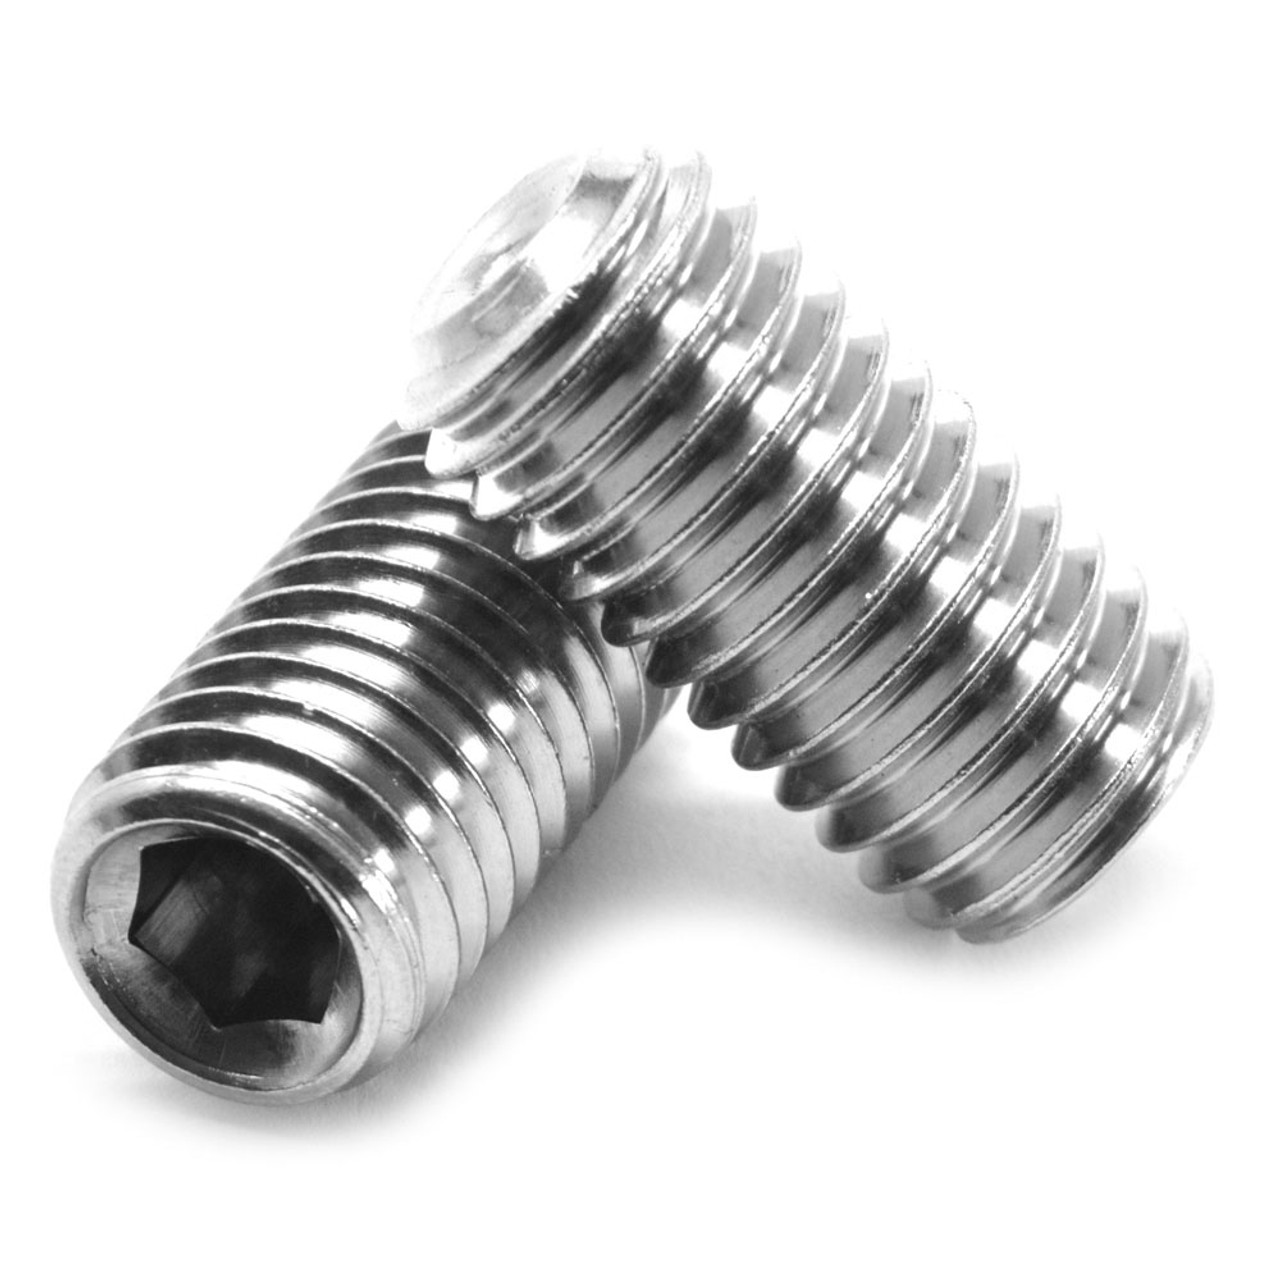 5/8"-11 x 2" Coarse Thread Socket Set Screw Cup Point Stainless Steel 18-8